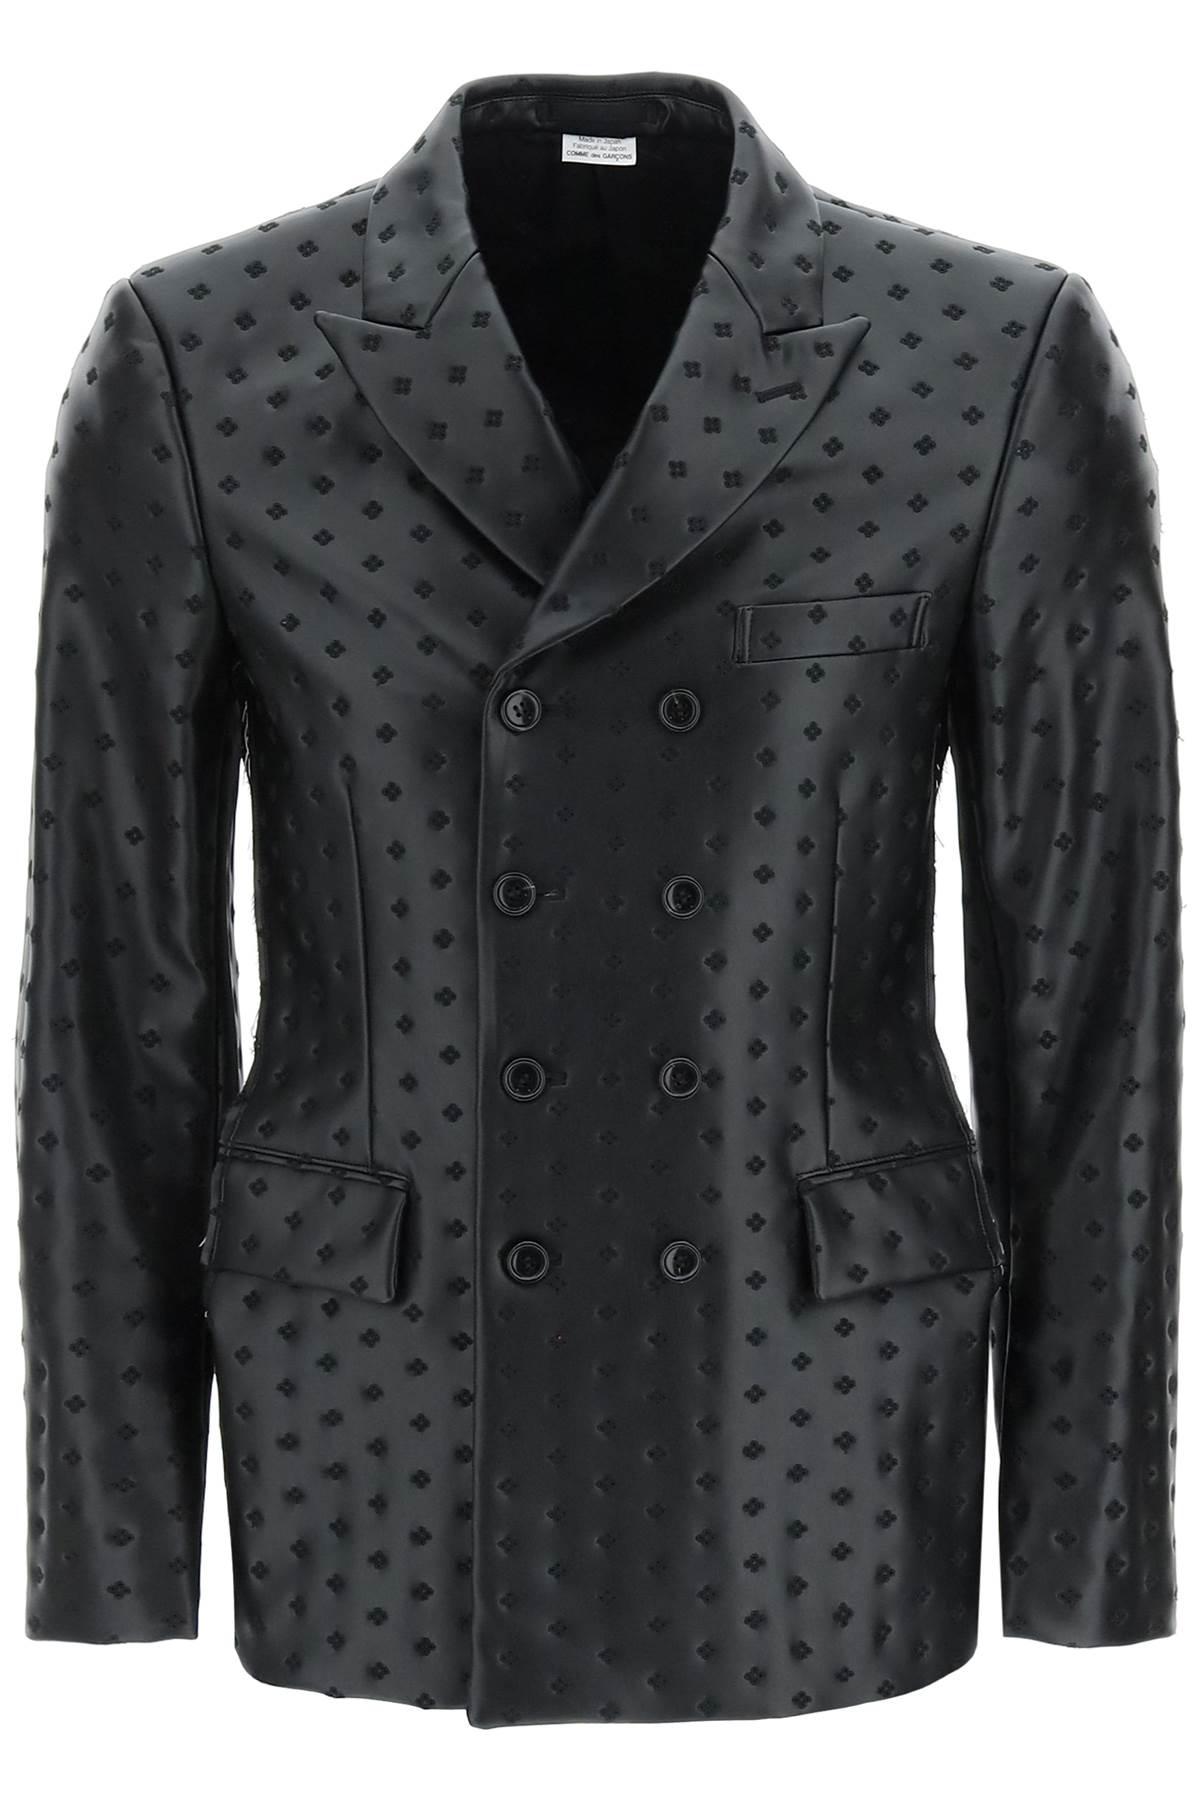 Comme Des Garçons Homme Plus Embroidered Faux Leather Blazer With Side Openings